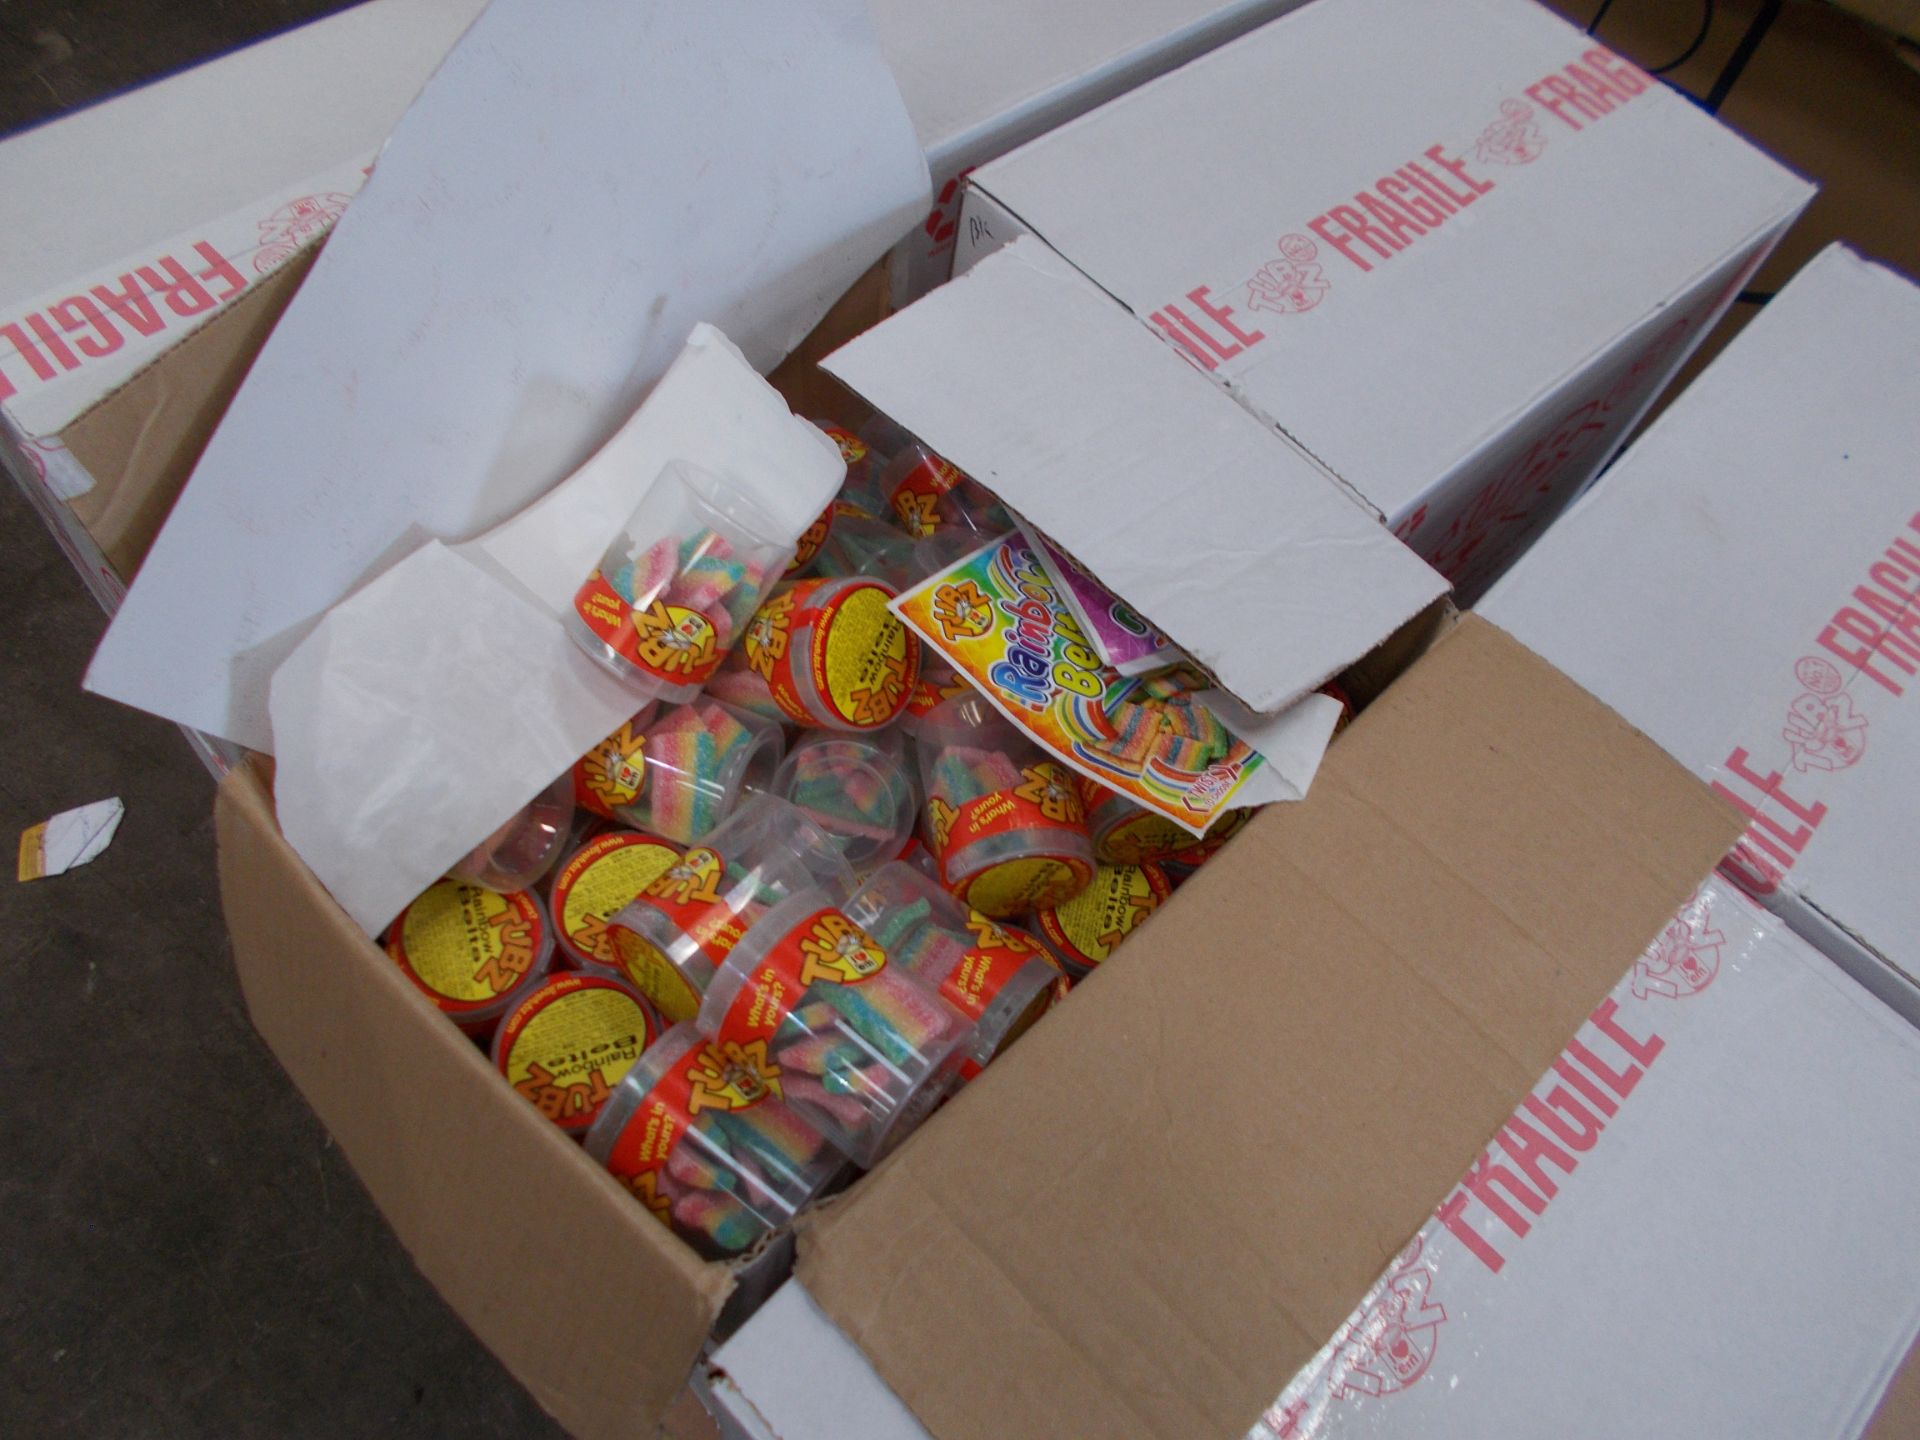 16 x Boxes of Tubz sweets, to pallet. Purchasers responsibility to check the dates prior to bidding, - Image 2 of 2